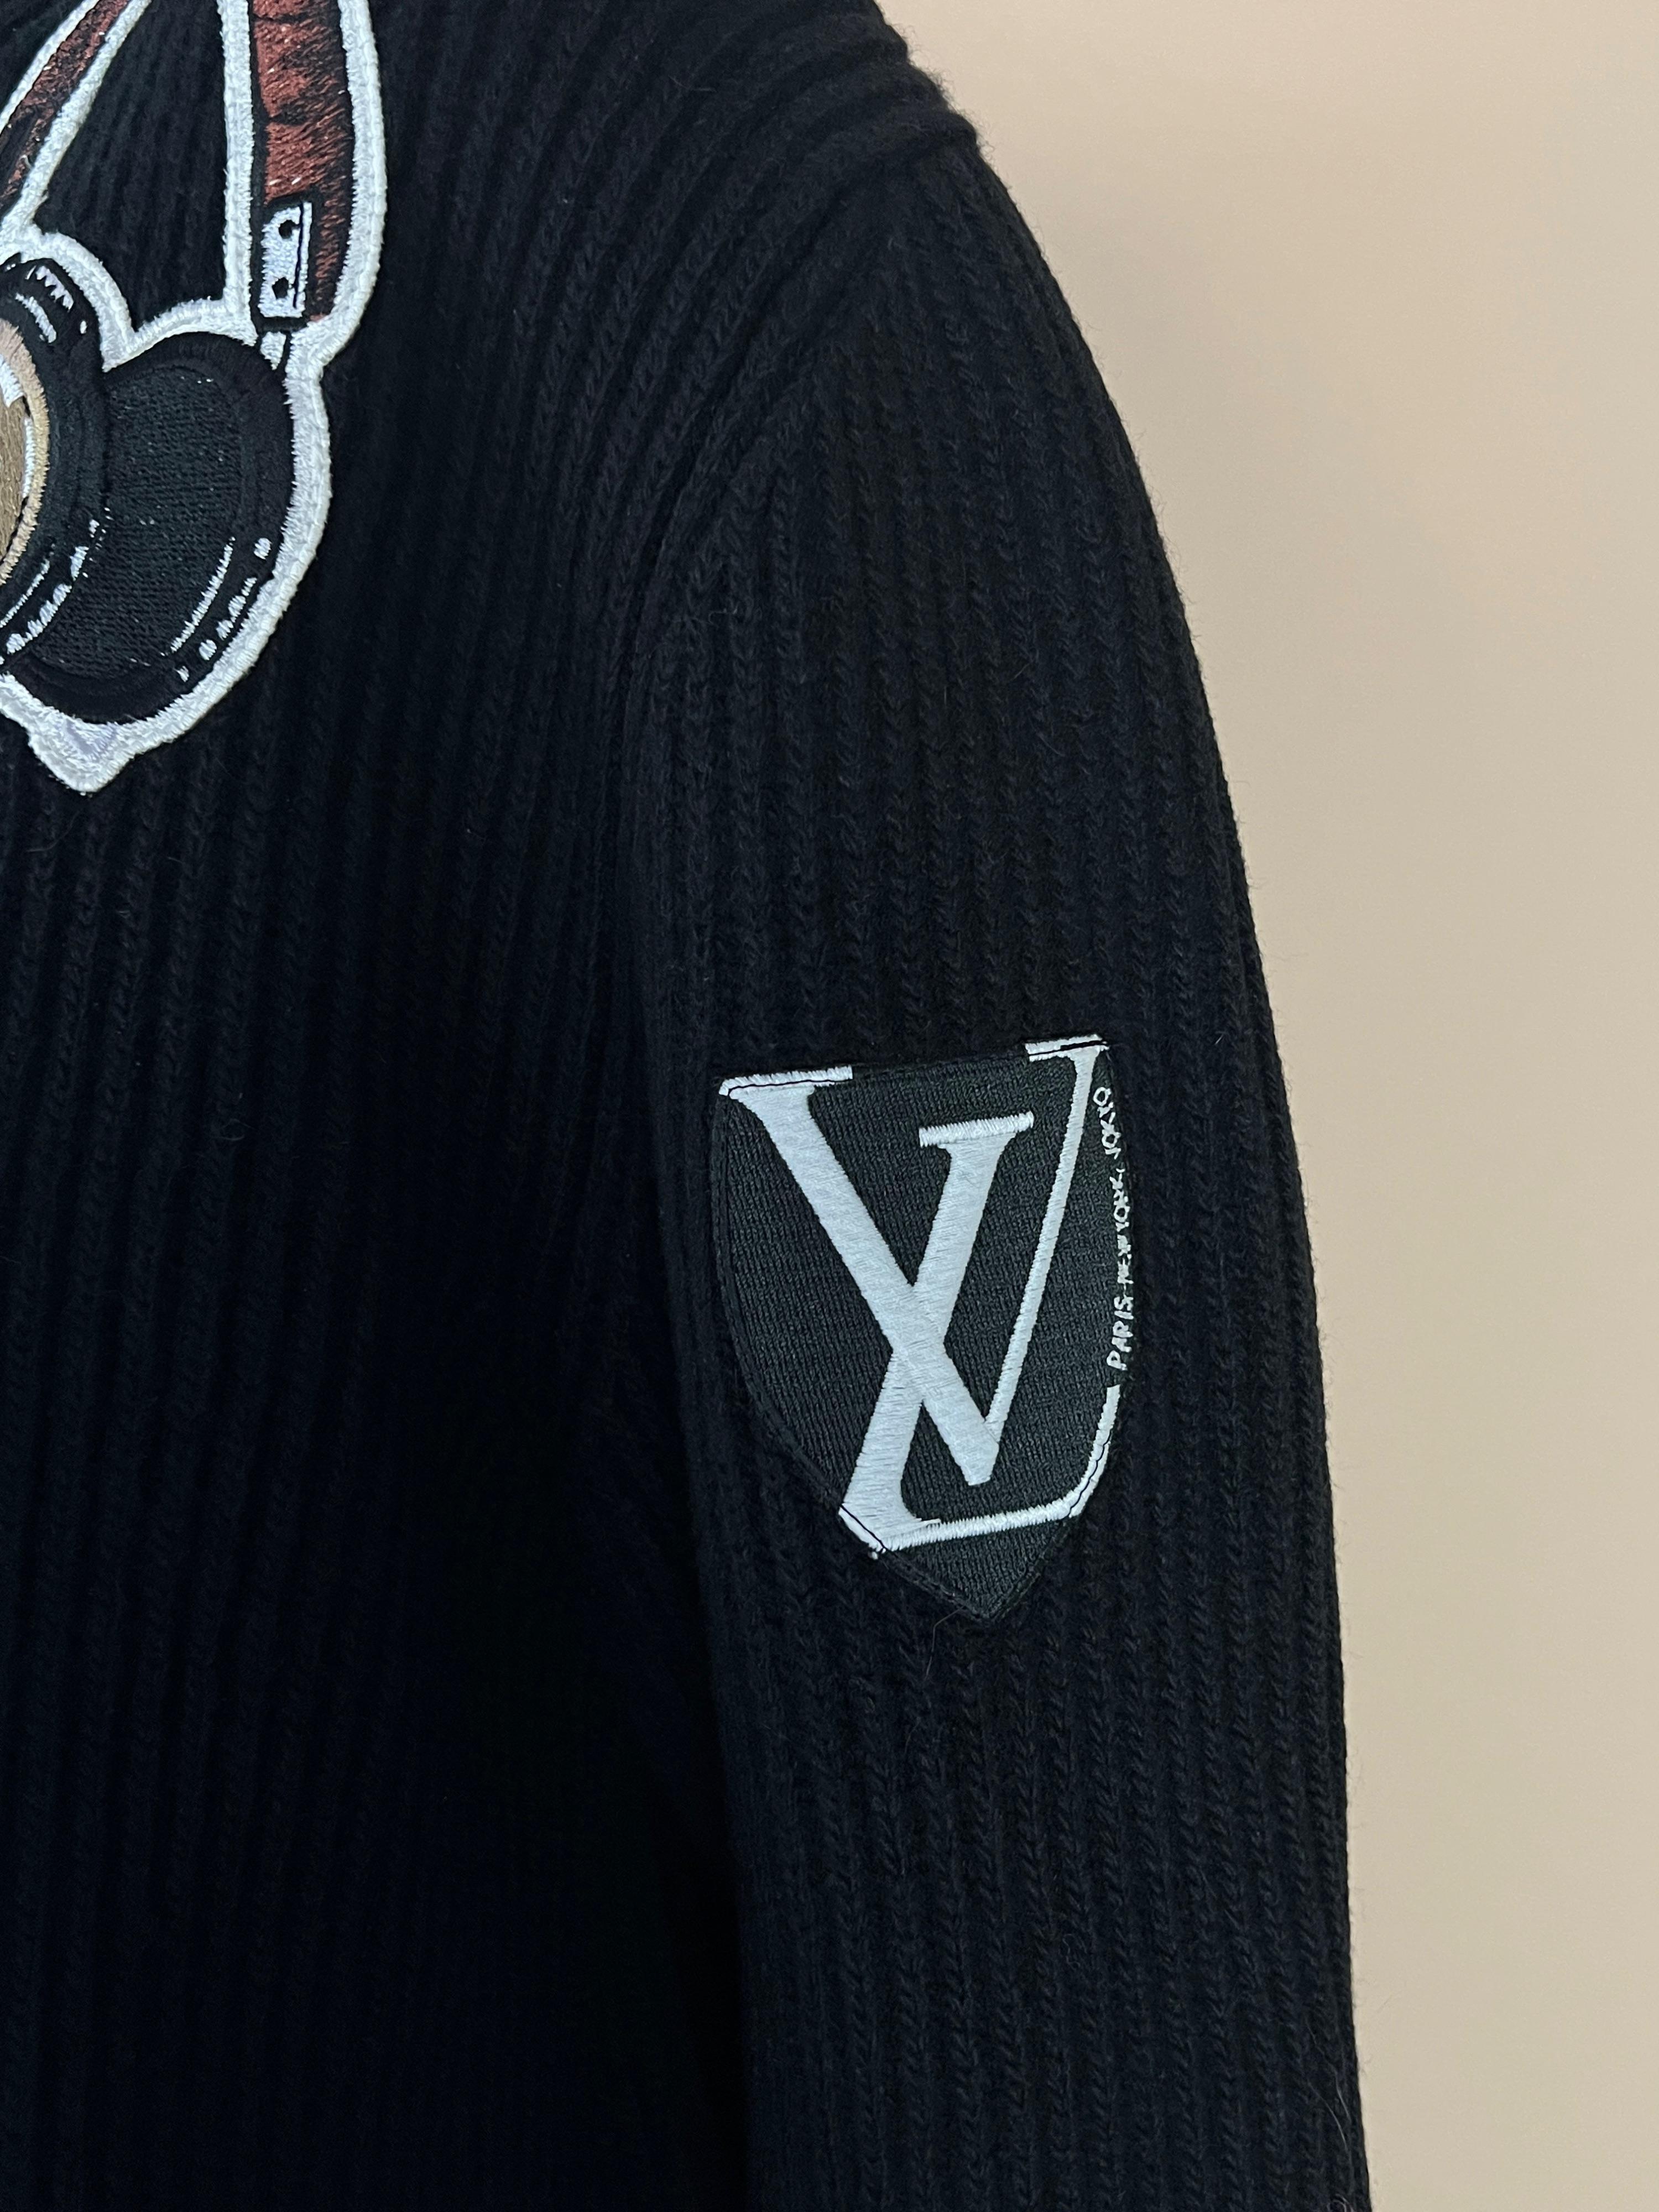 Louis Vuitton Black Ribbed Wool & Cashmere Giant Stickers Patch Jumper 4